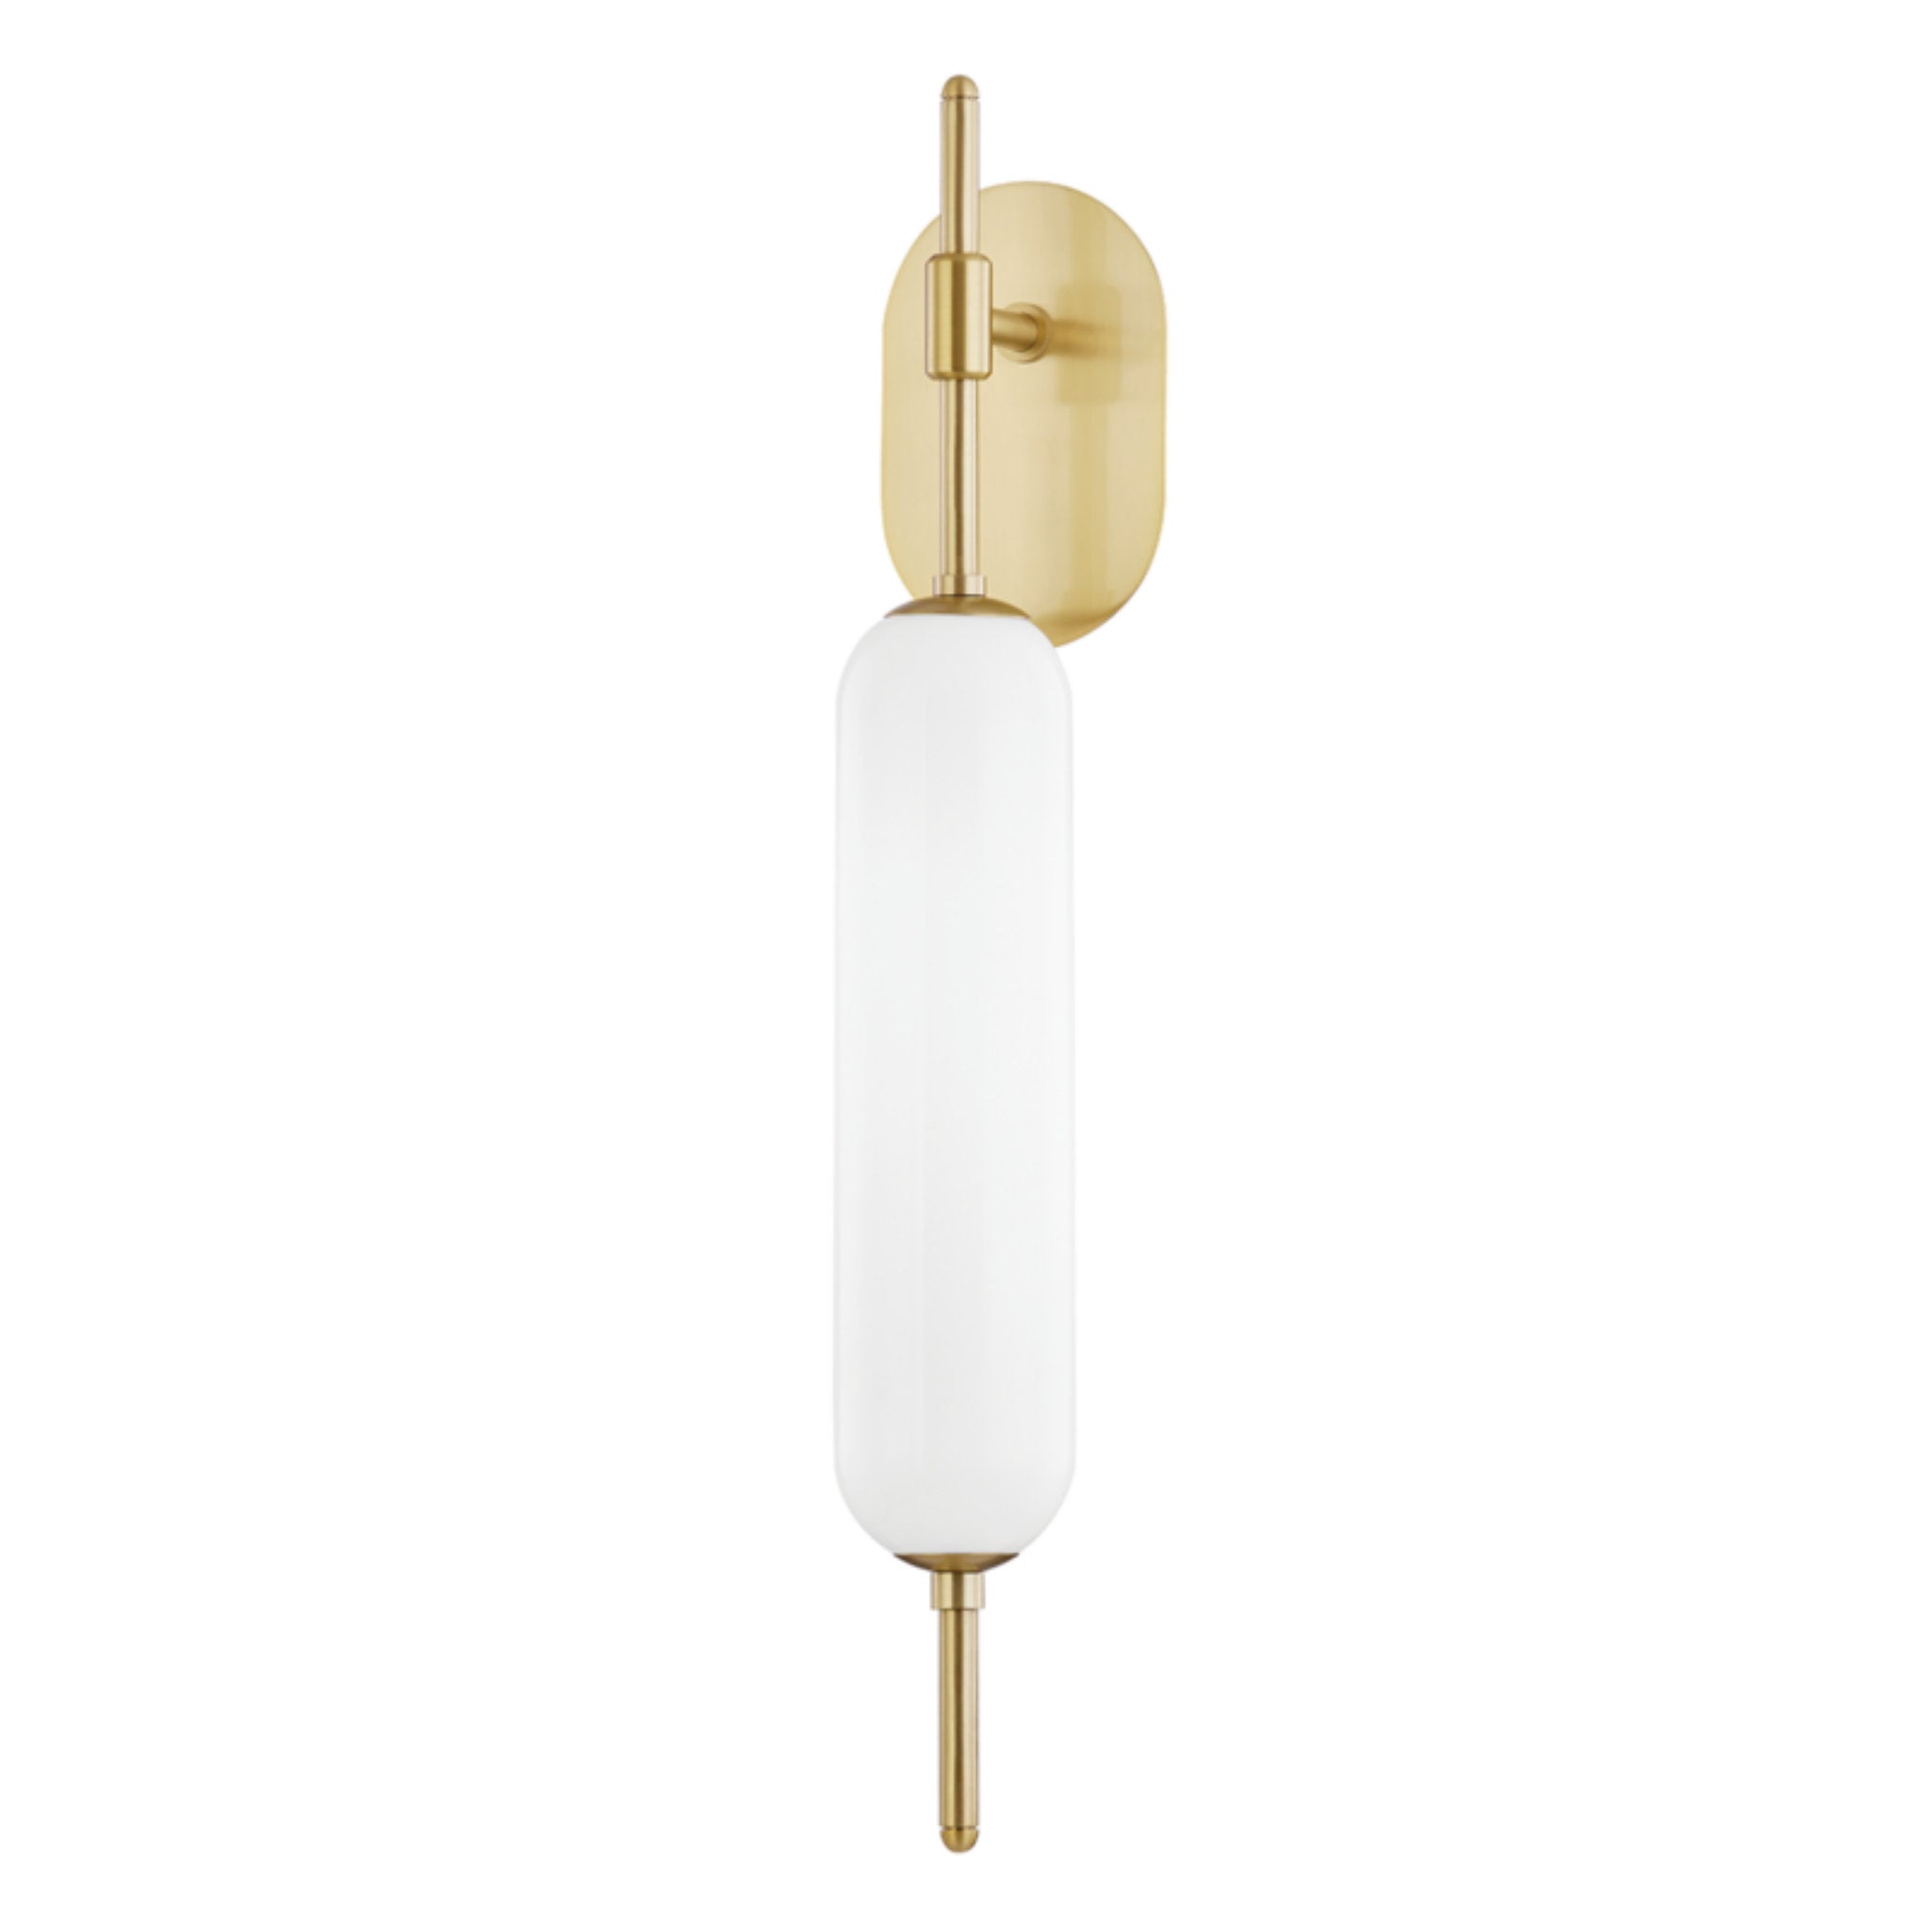 Miley 1-Light Wall Sconce in Aged Brass